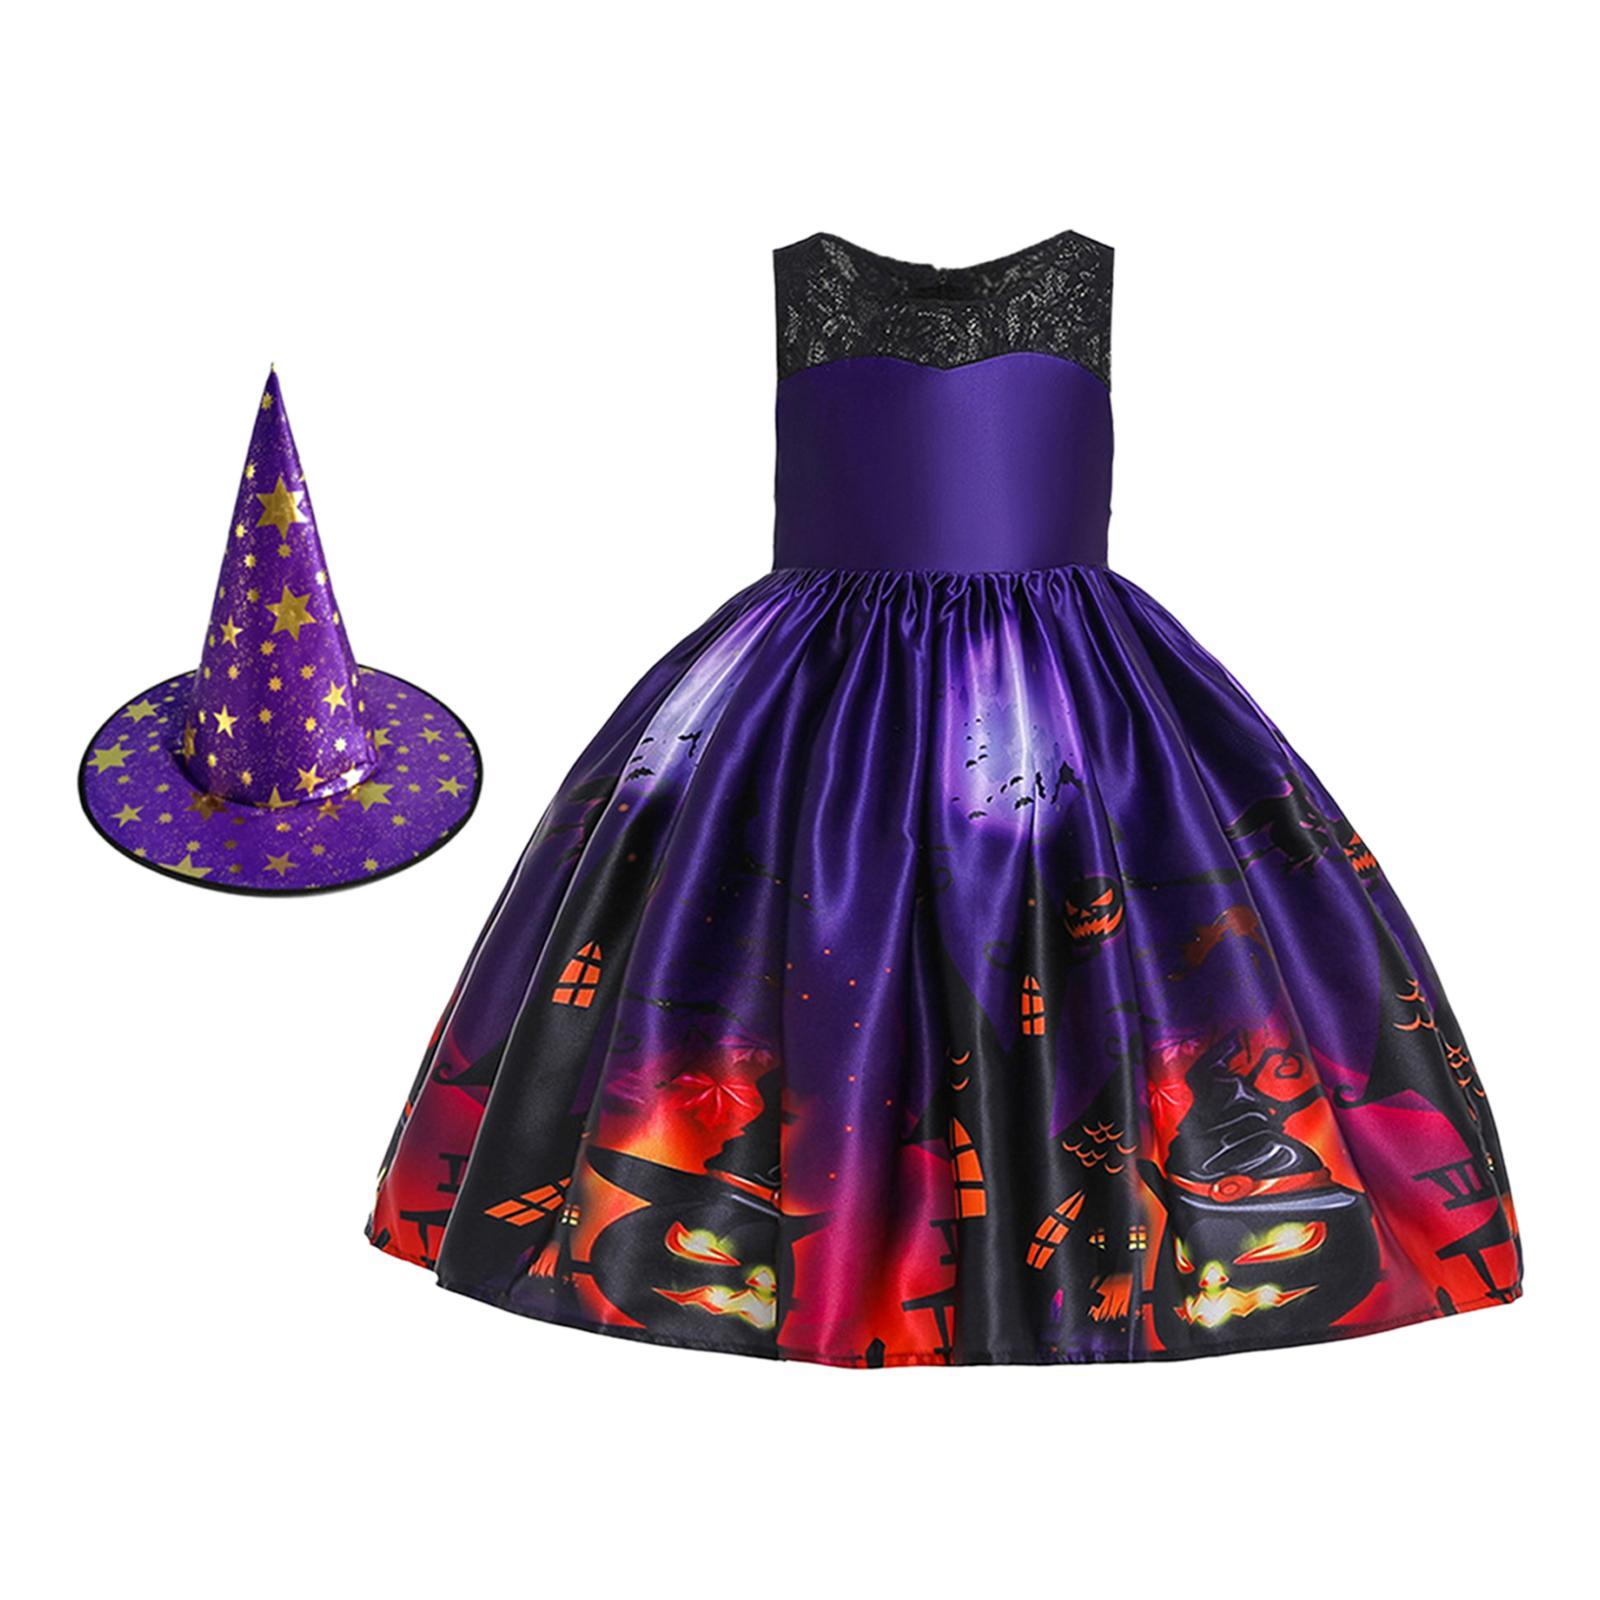 Girl Witch Halloween Costume Dress Fancy Dress Cosplay Festival Party Outfit